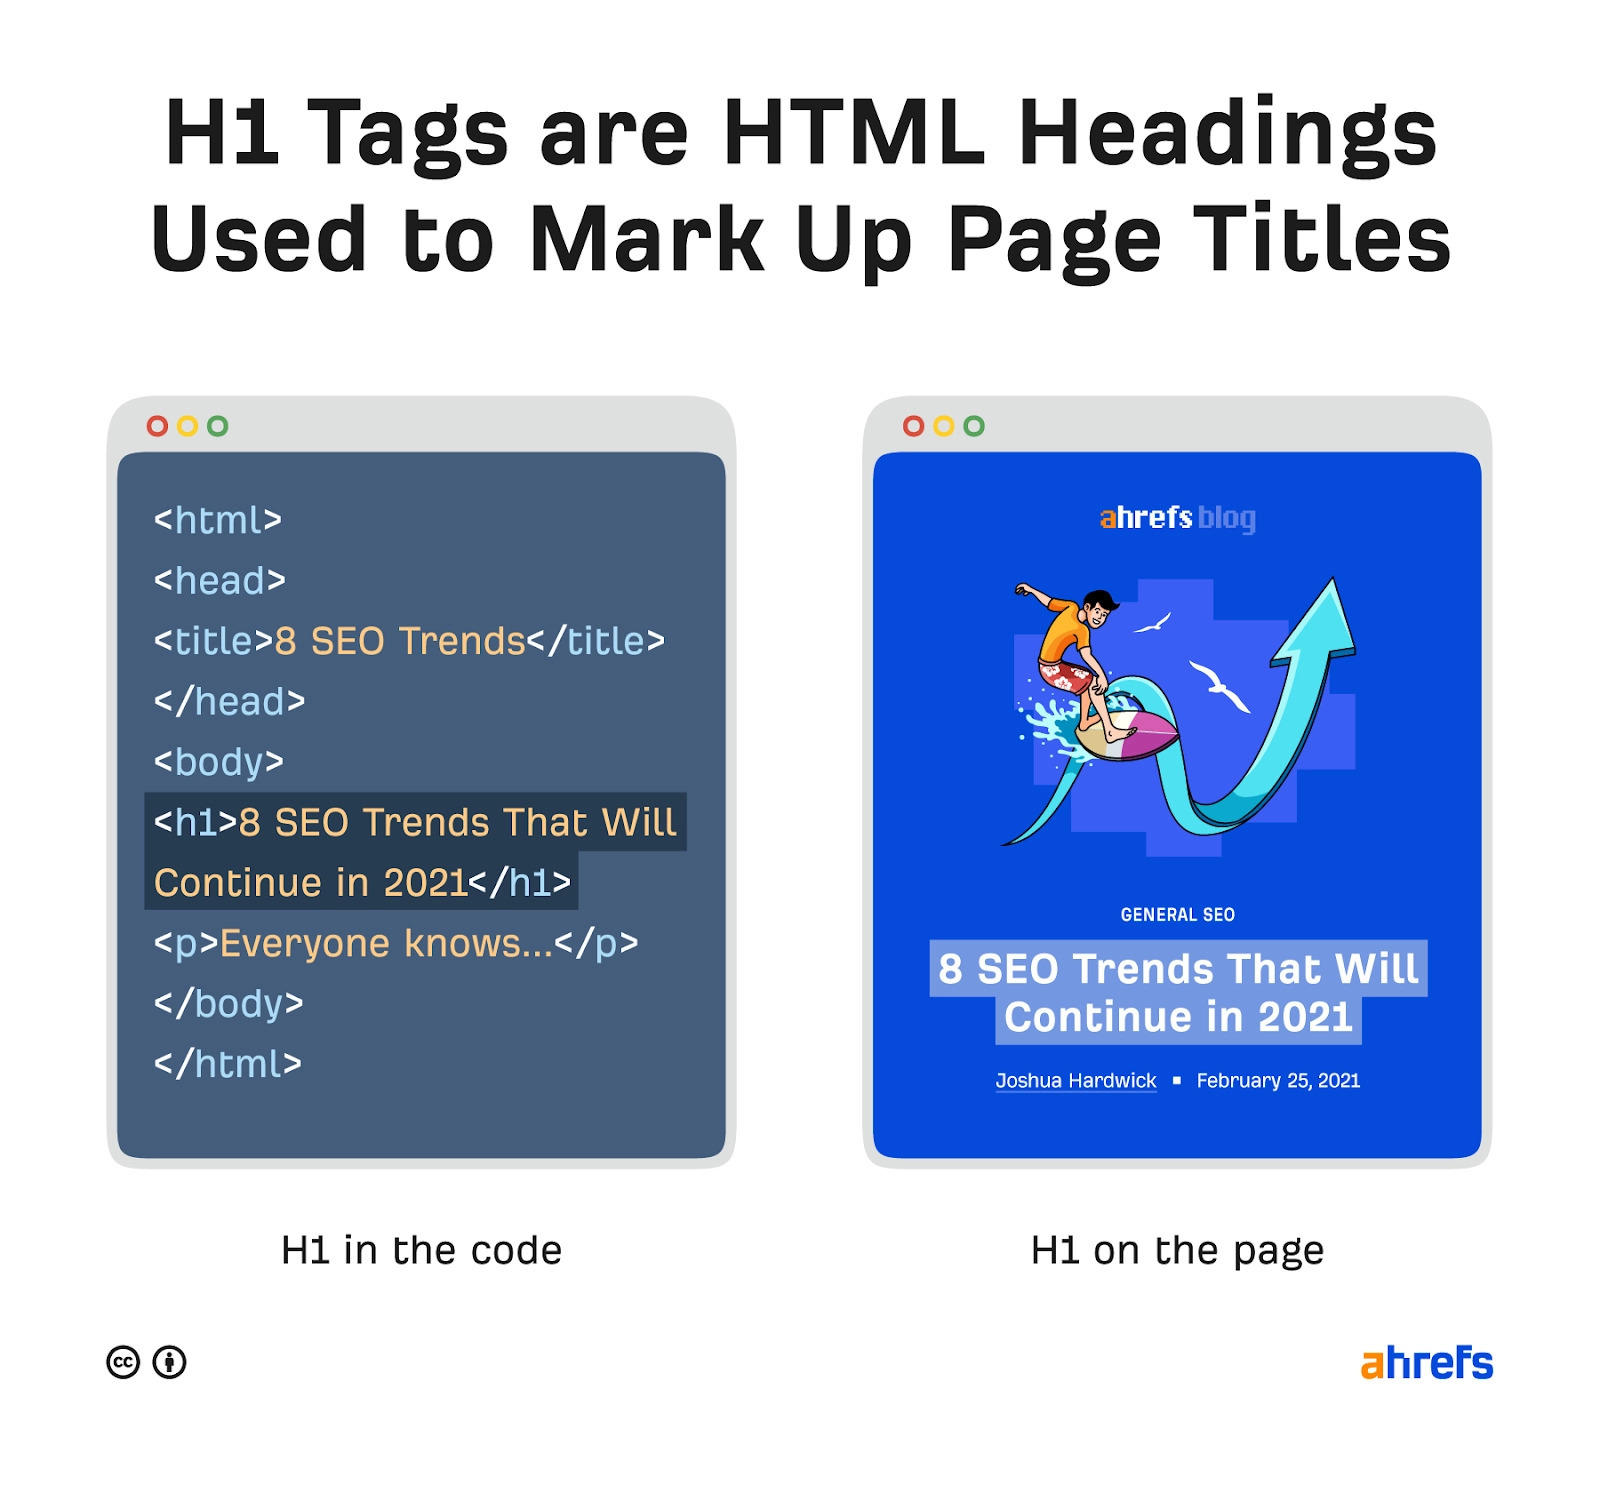 How H1s look in the code vs. on the page
